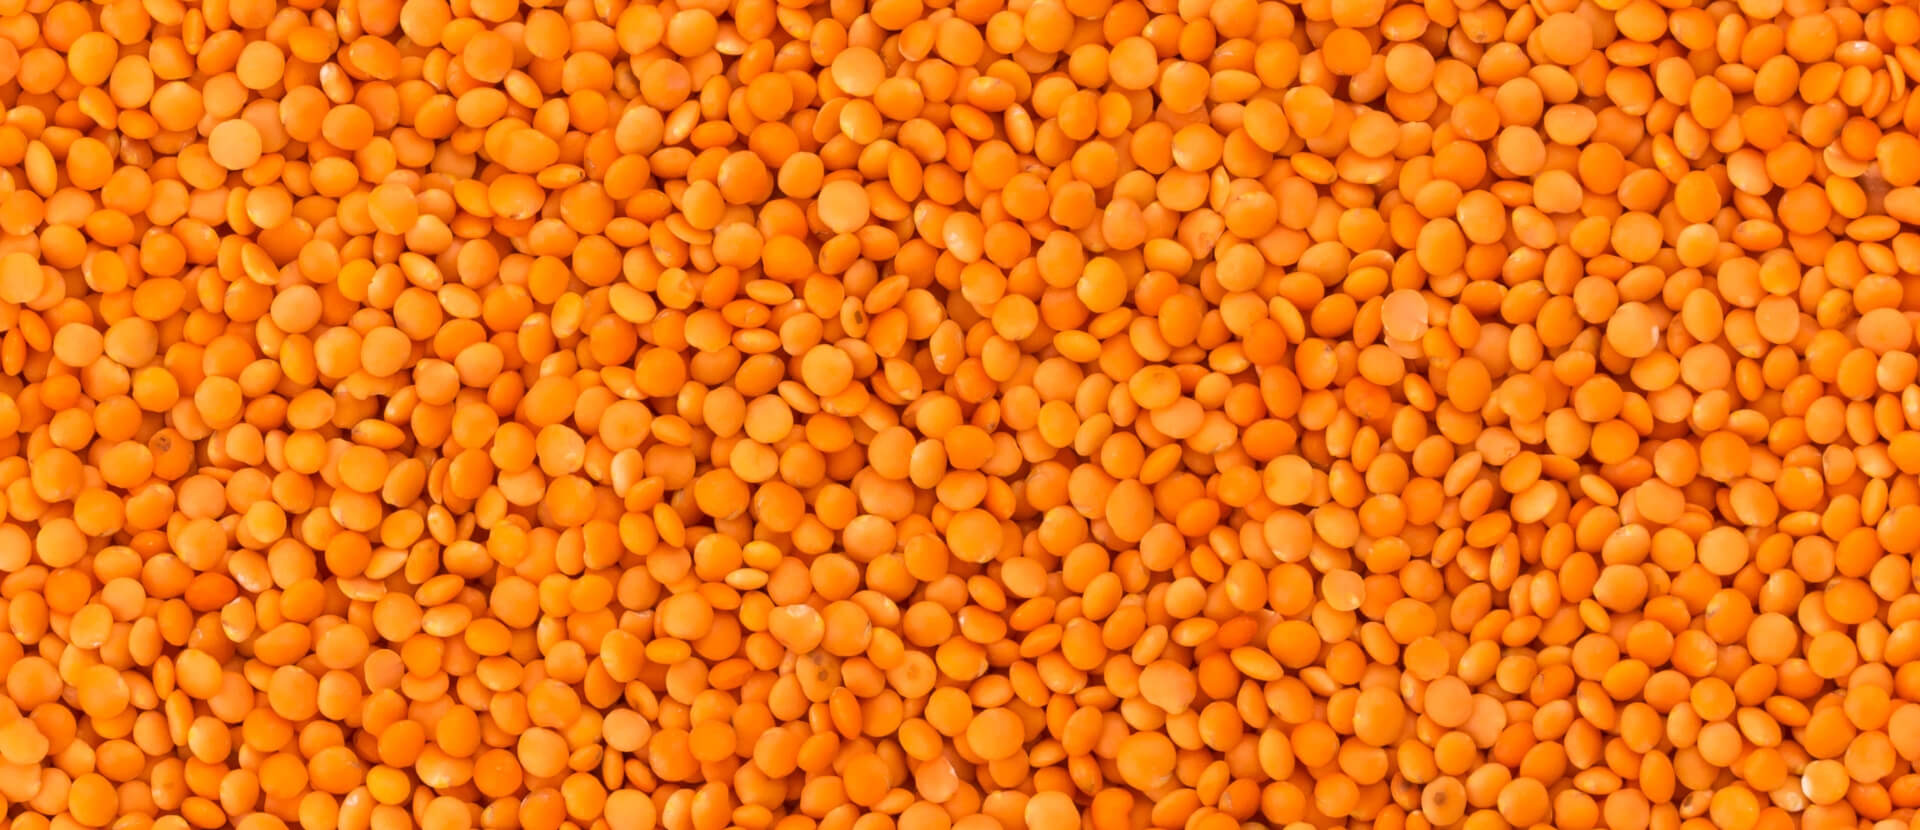 Whole red lentils